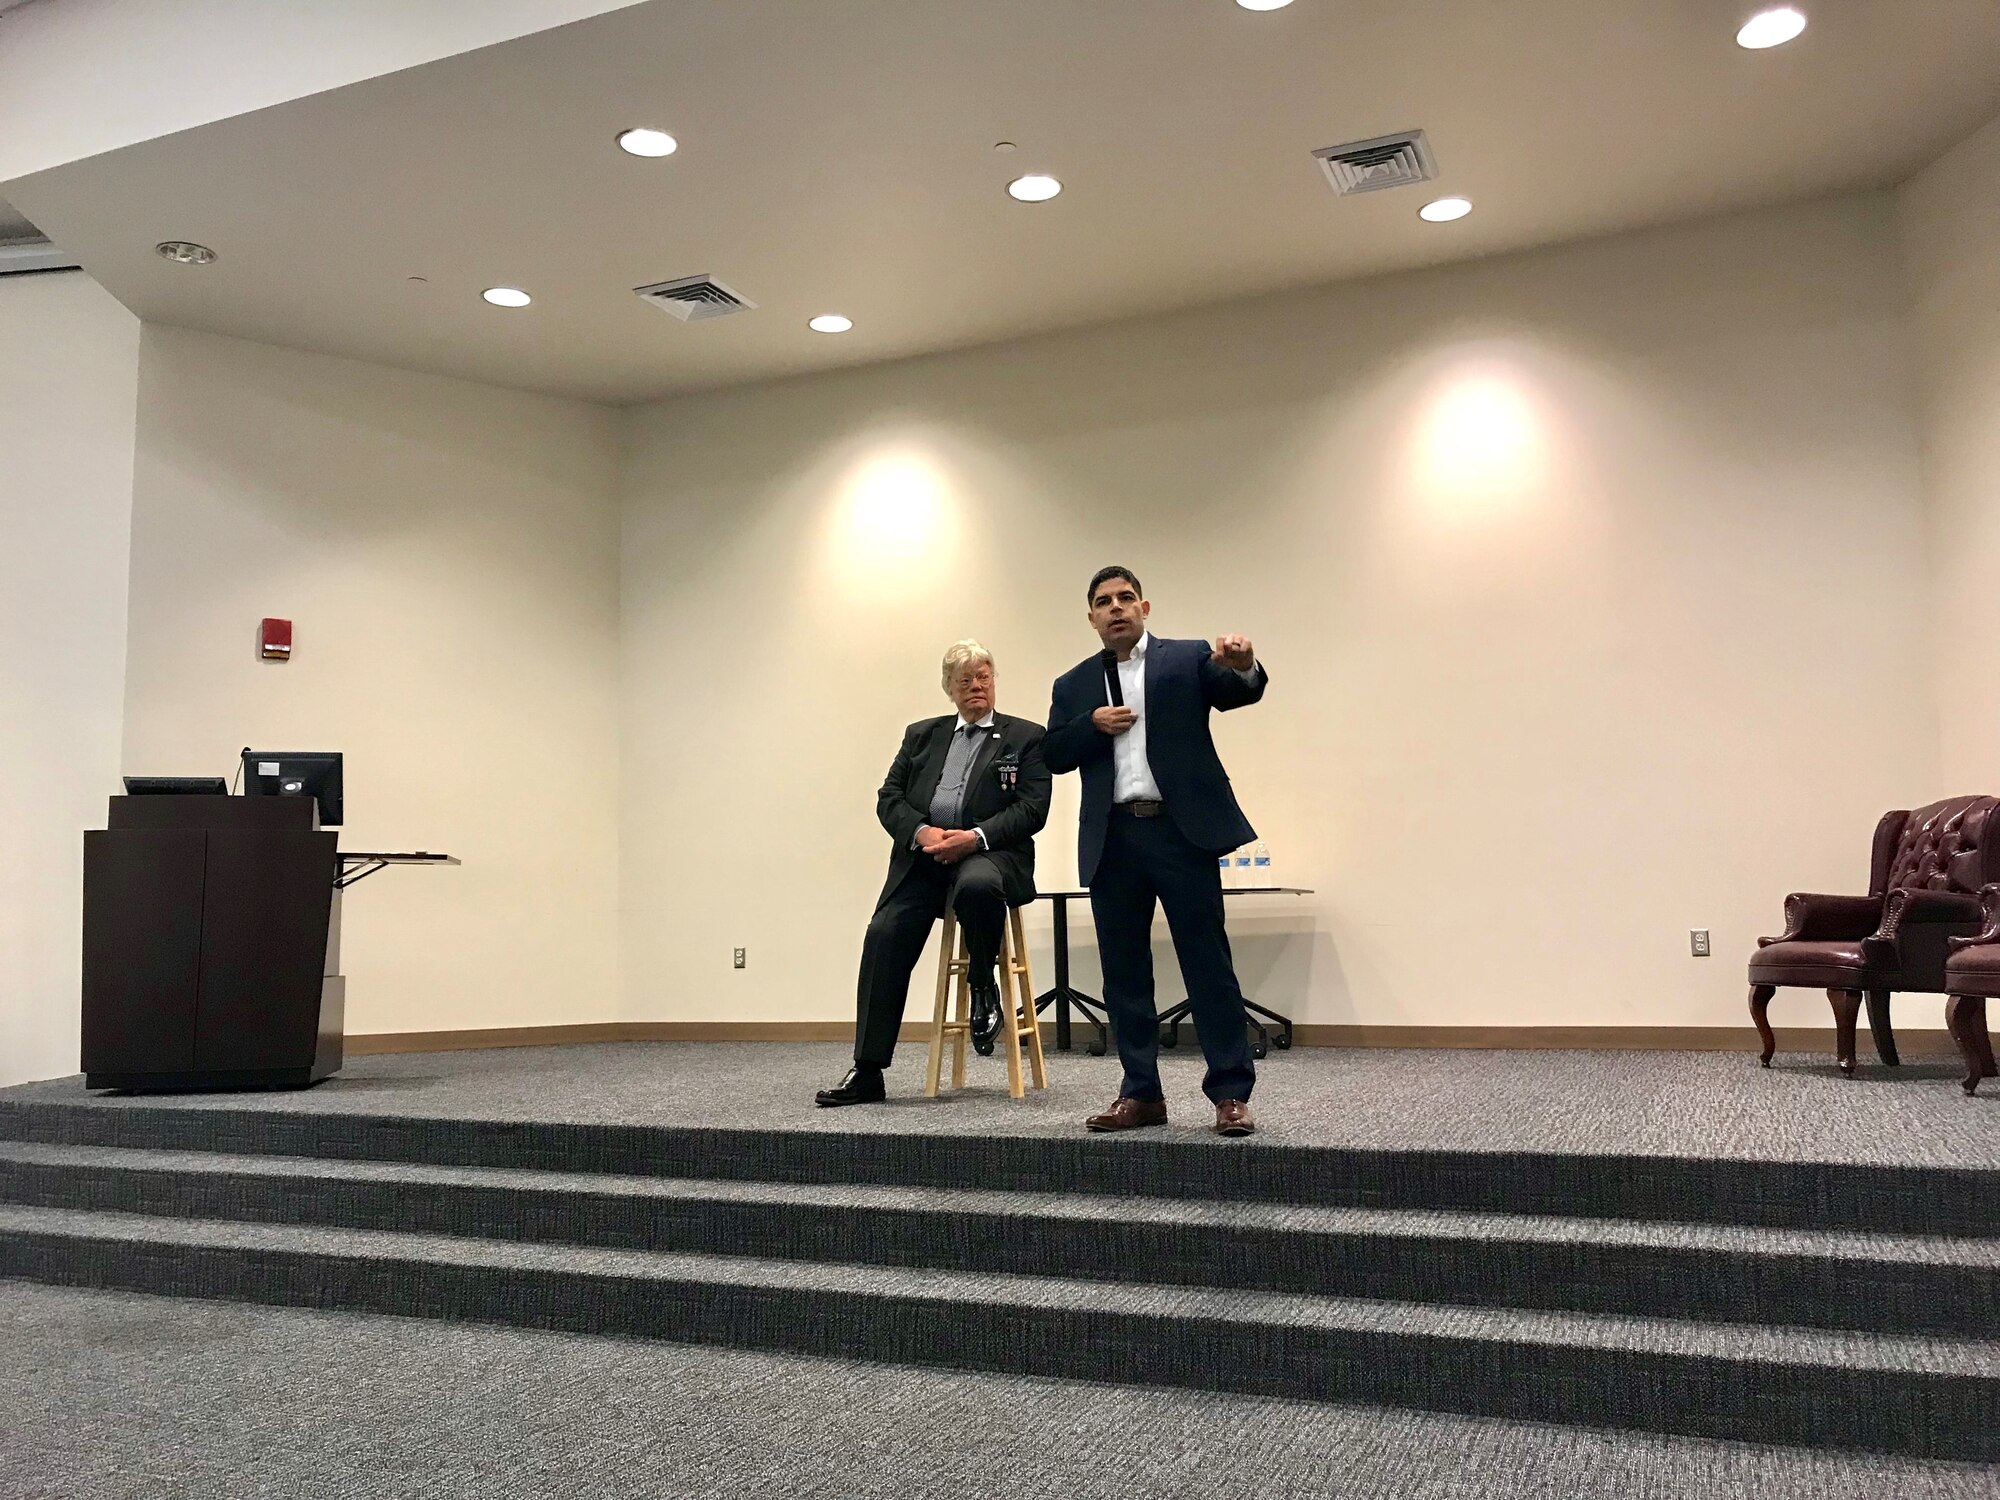 Dave Roever, U.S. Navy veteran and wounded warrior (seated) and U.S. Army Capt. (Ret.) John Arroyo, speak to Keesler Airmen about their personal experiences of recovery during a resiliency talk April 11, 2019 at Keesler Air Force Base, Miss. Both Roever and Arroyo shared how they continue to fight through their physical and emotional pain to teach others about resiliency. (U.S. Air Force photo by Sarah Loicano)